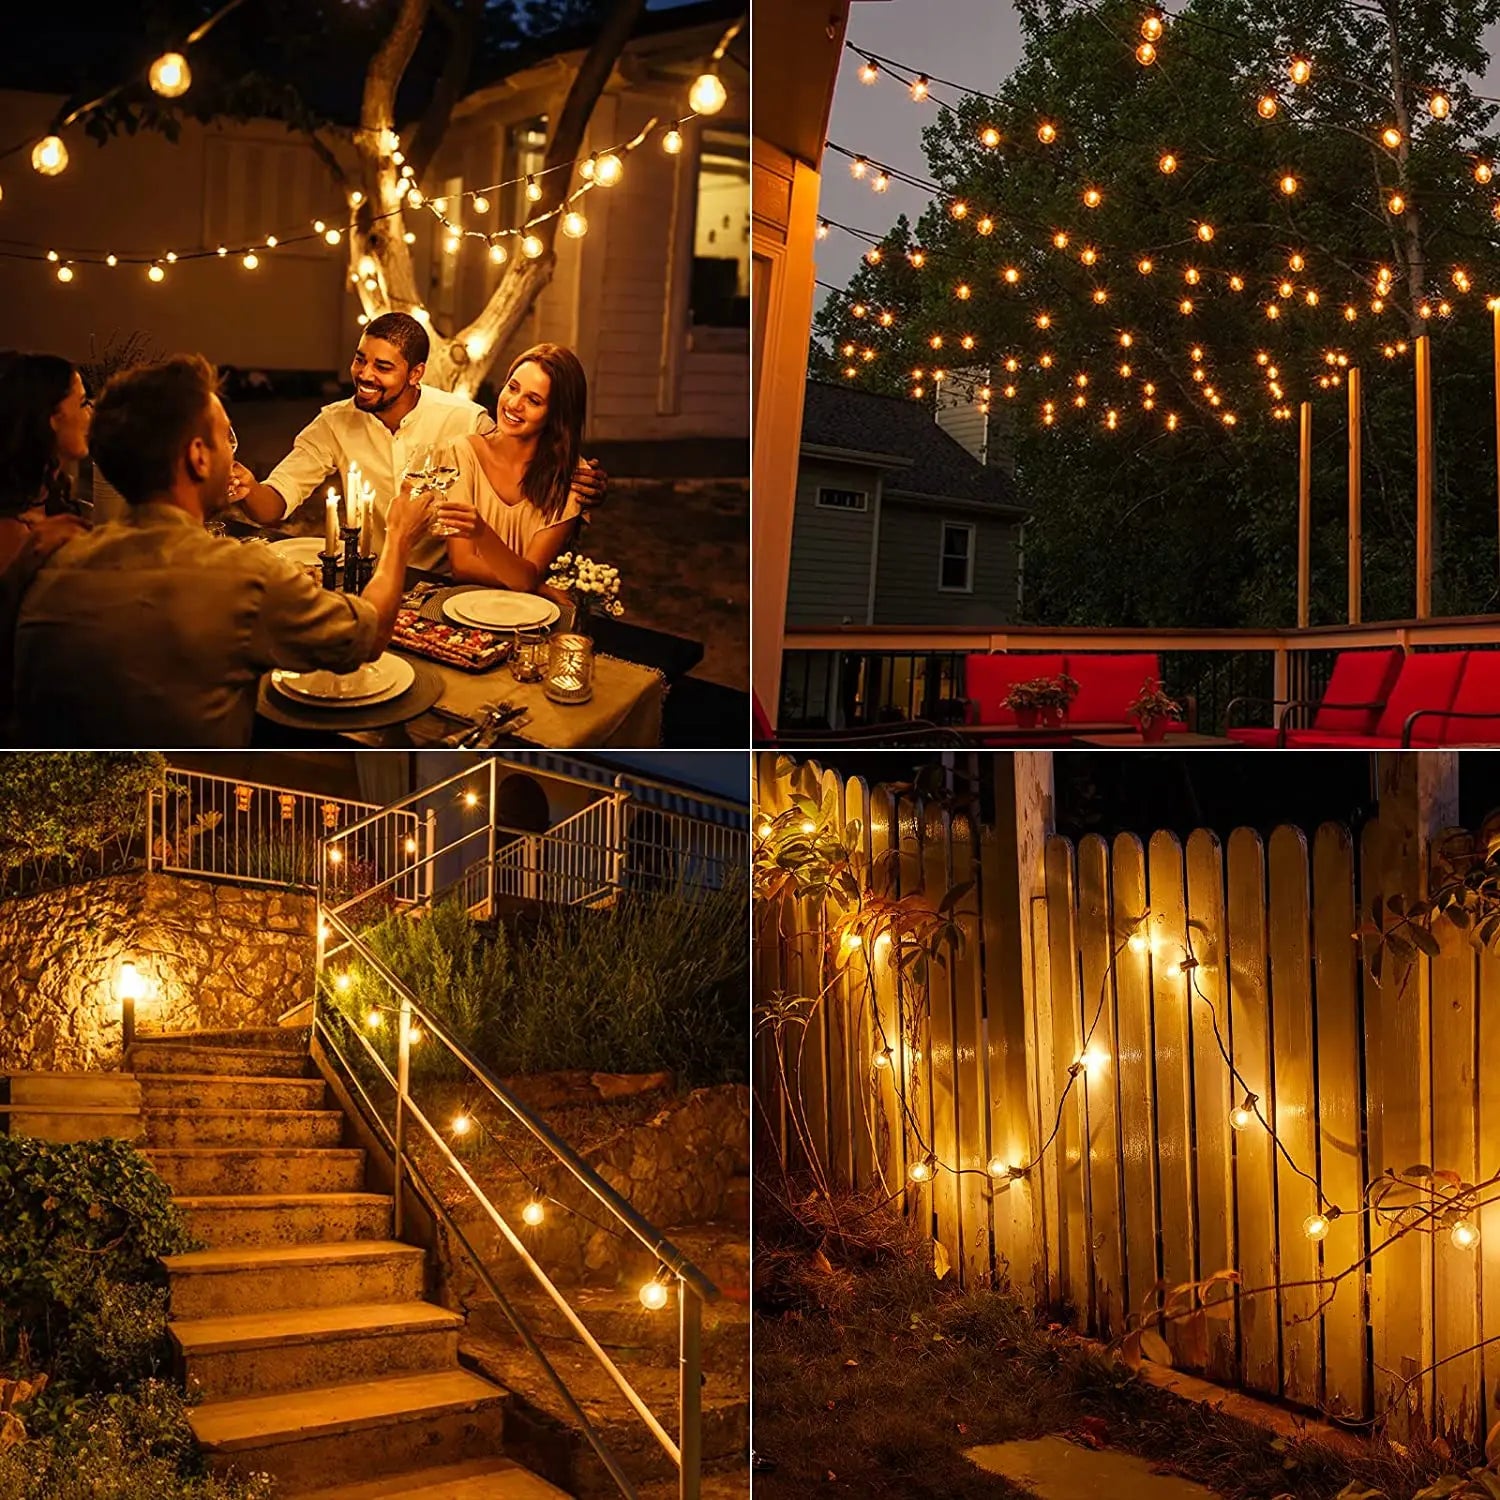 LED G40 Globe String Light, Waterproof LED beads, round shape, 220V DC power, widely used outdoor lighting product.